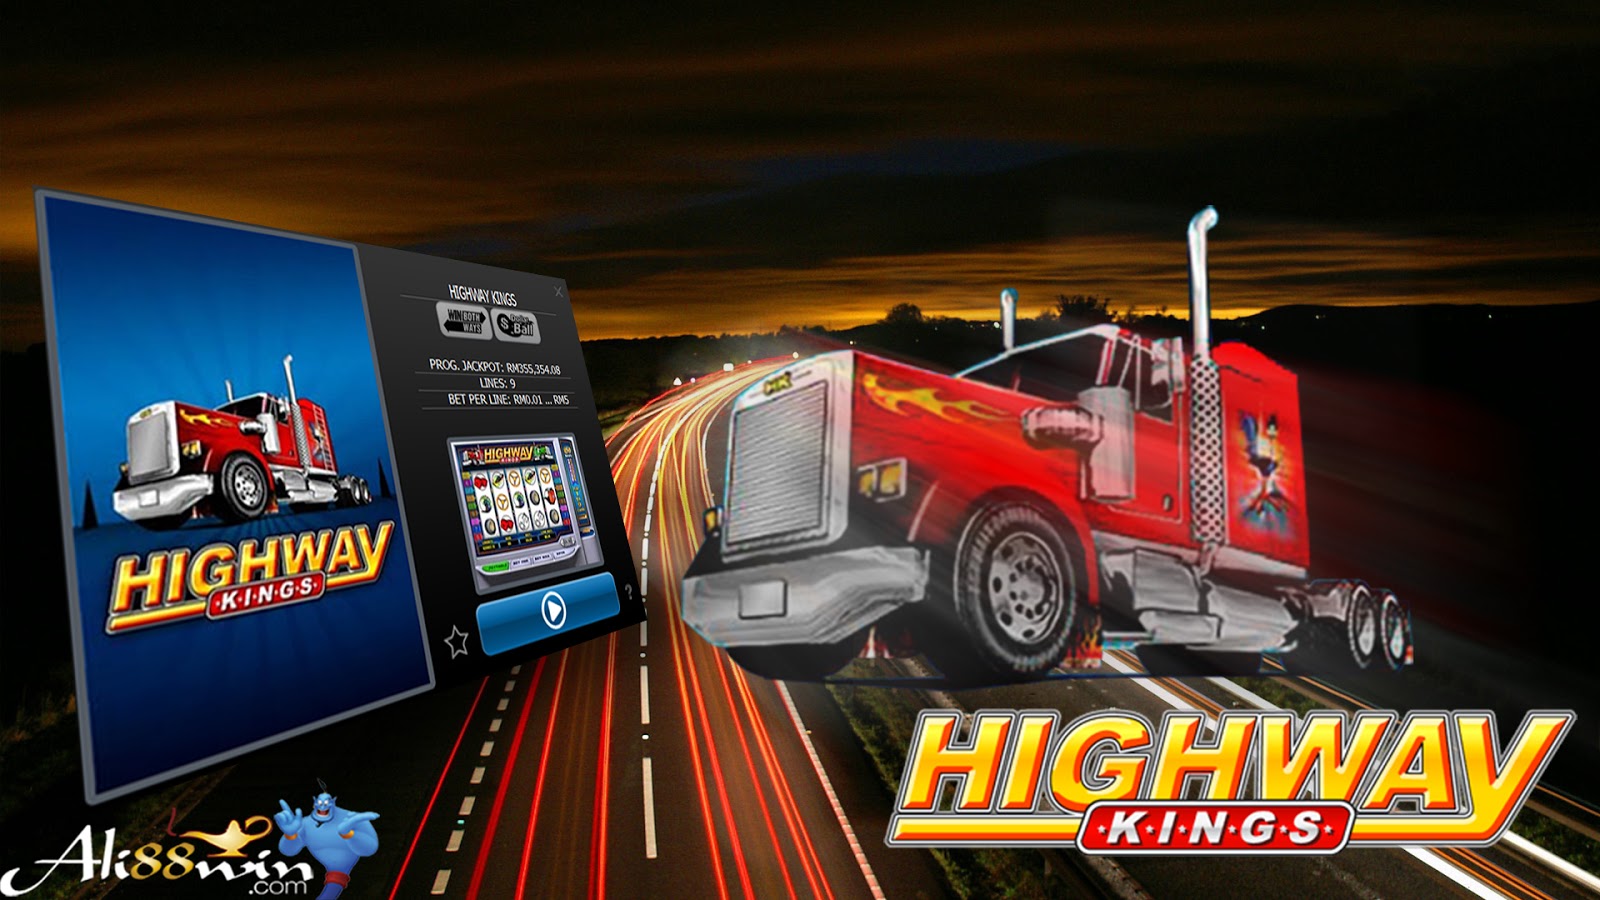 A Preview Of The 918 kiss Highway Slot Game